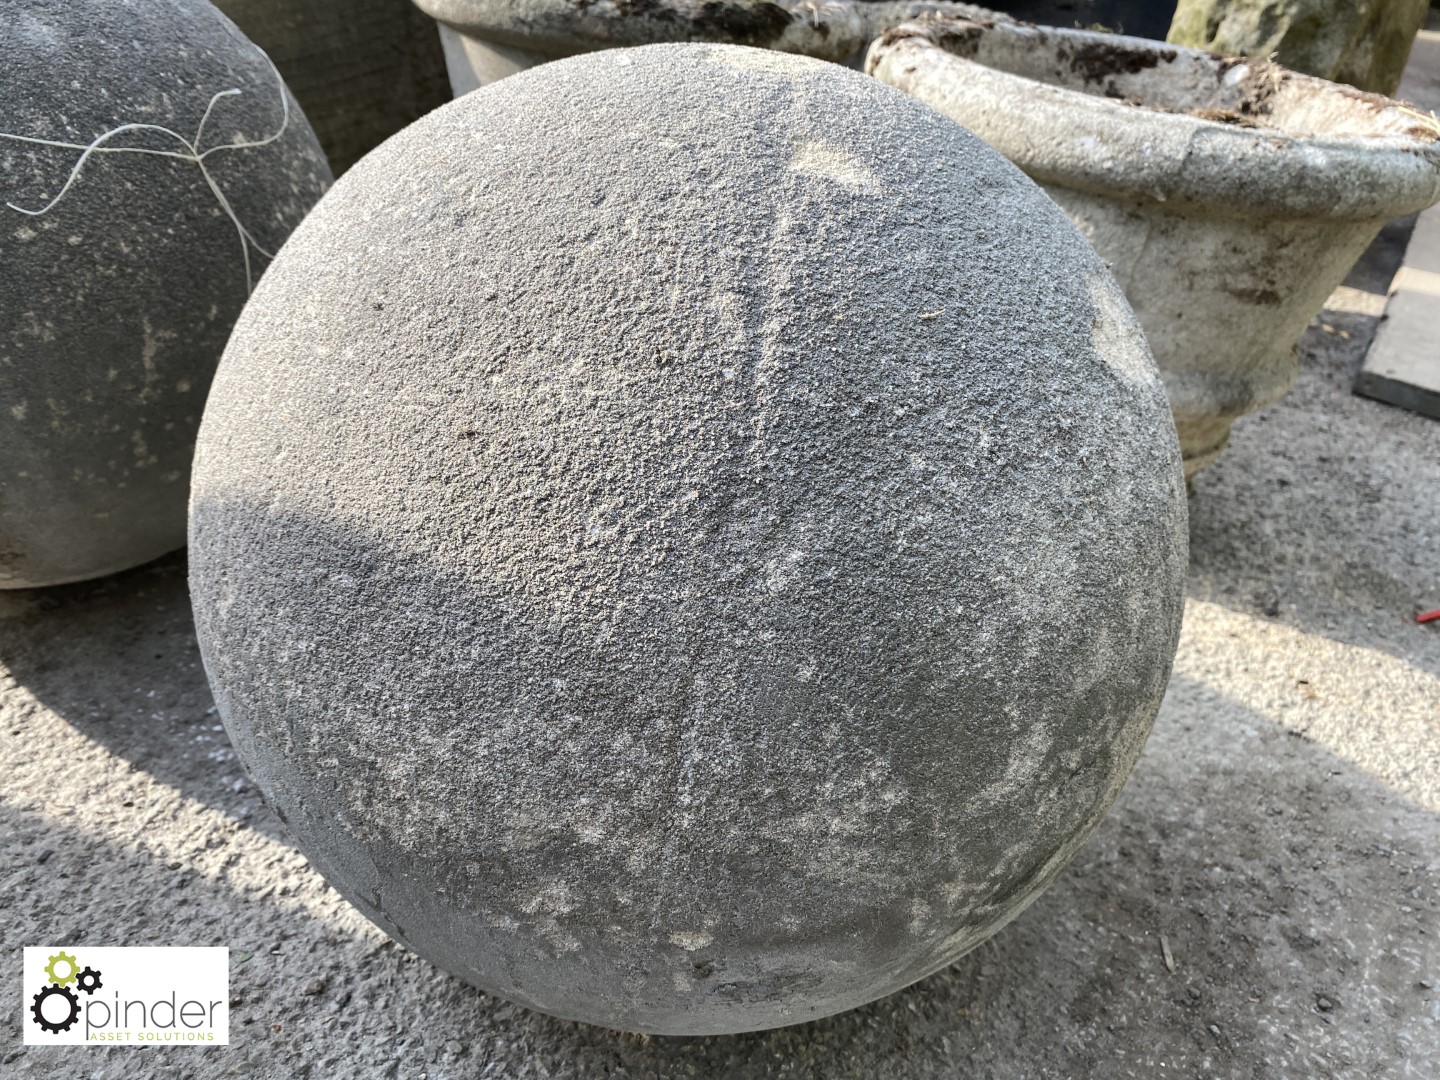 Pair of reconstituted stone Balls, approx. 16in diameter - Image 2 of 2